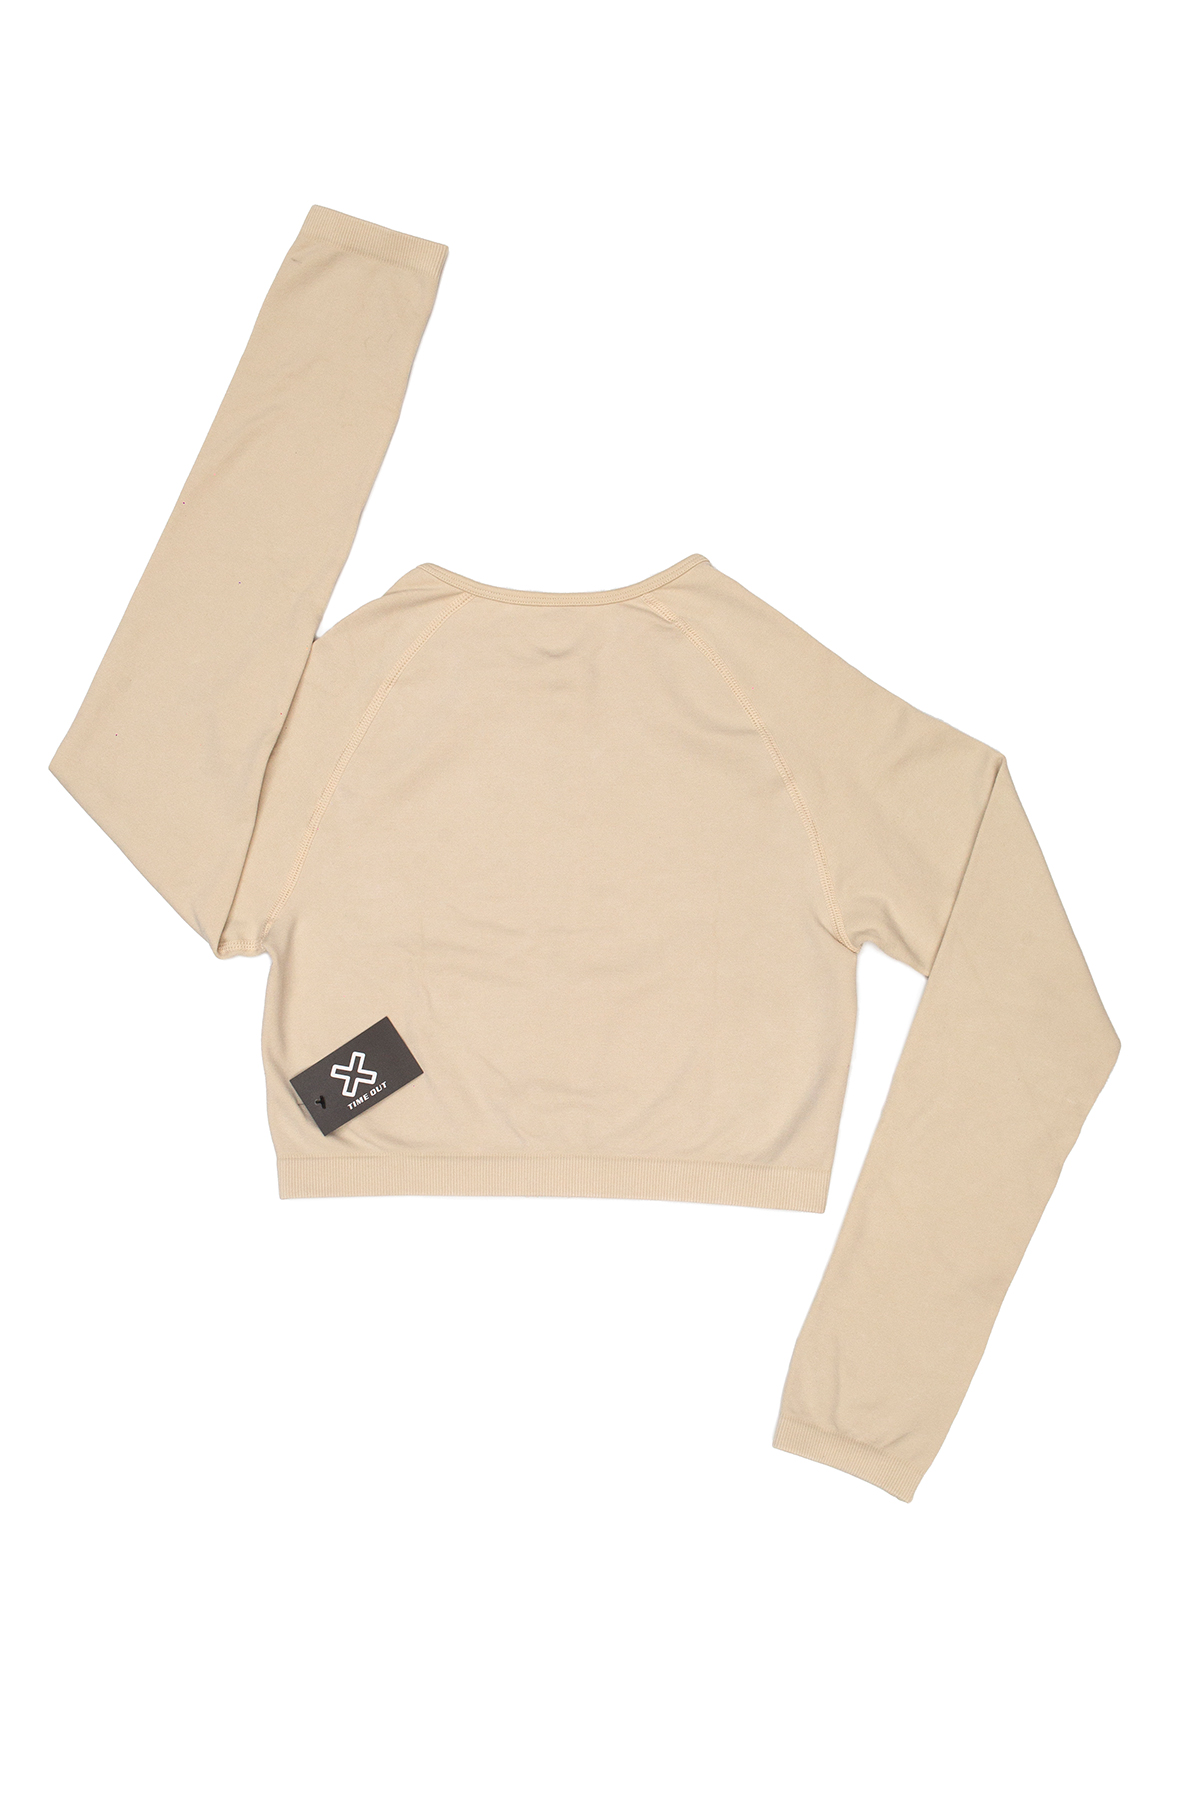 Time-Out-X-Zip-Up-Longsleeve-Workout-Crop-Top—Creamy-White—Back